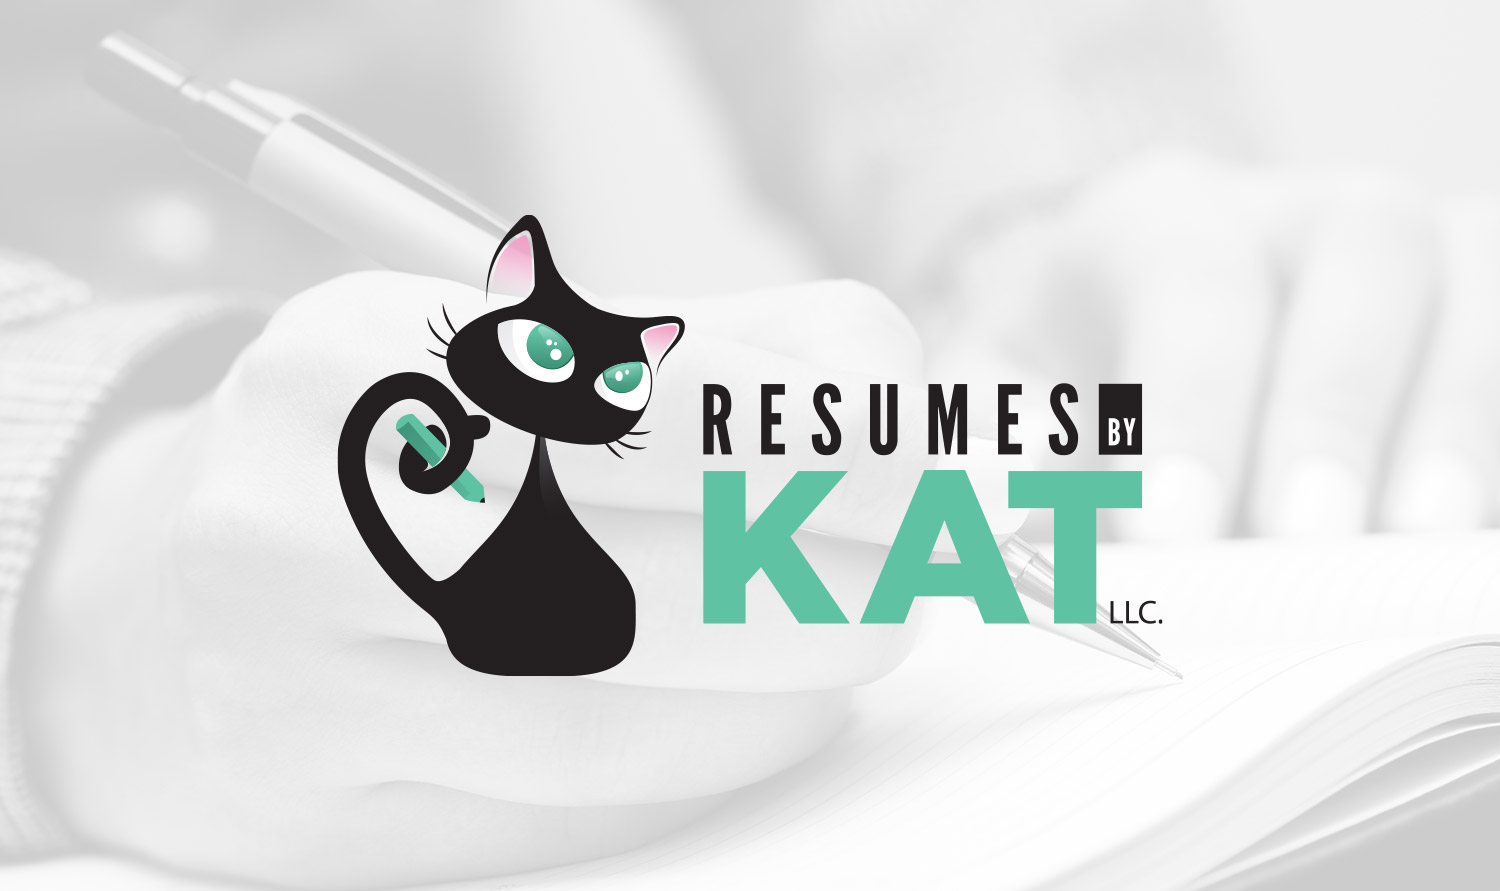 Resumes by kat featured image